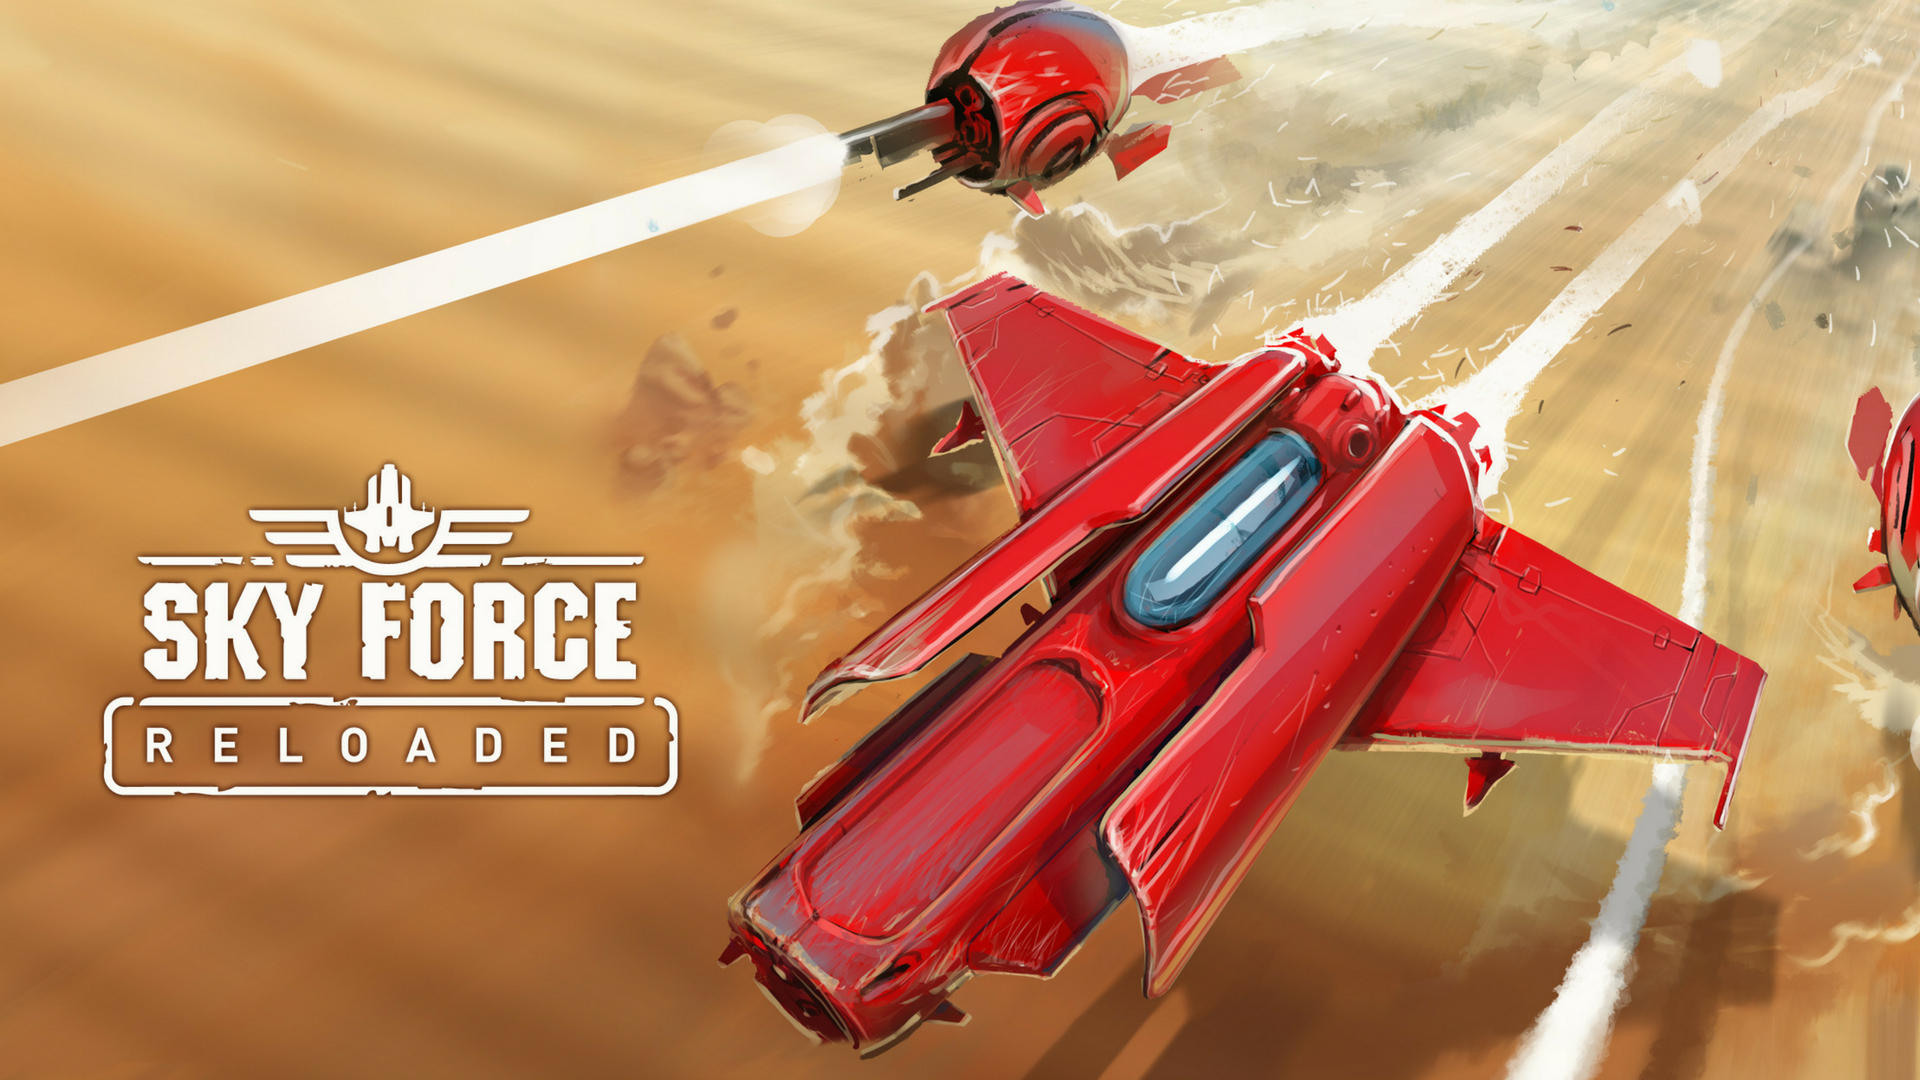 Video For Sky Force Reloaded Lifts off on Xbox One